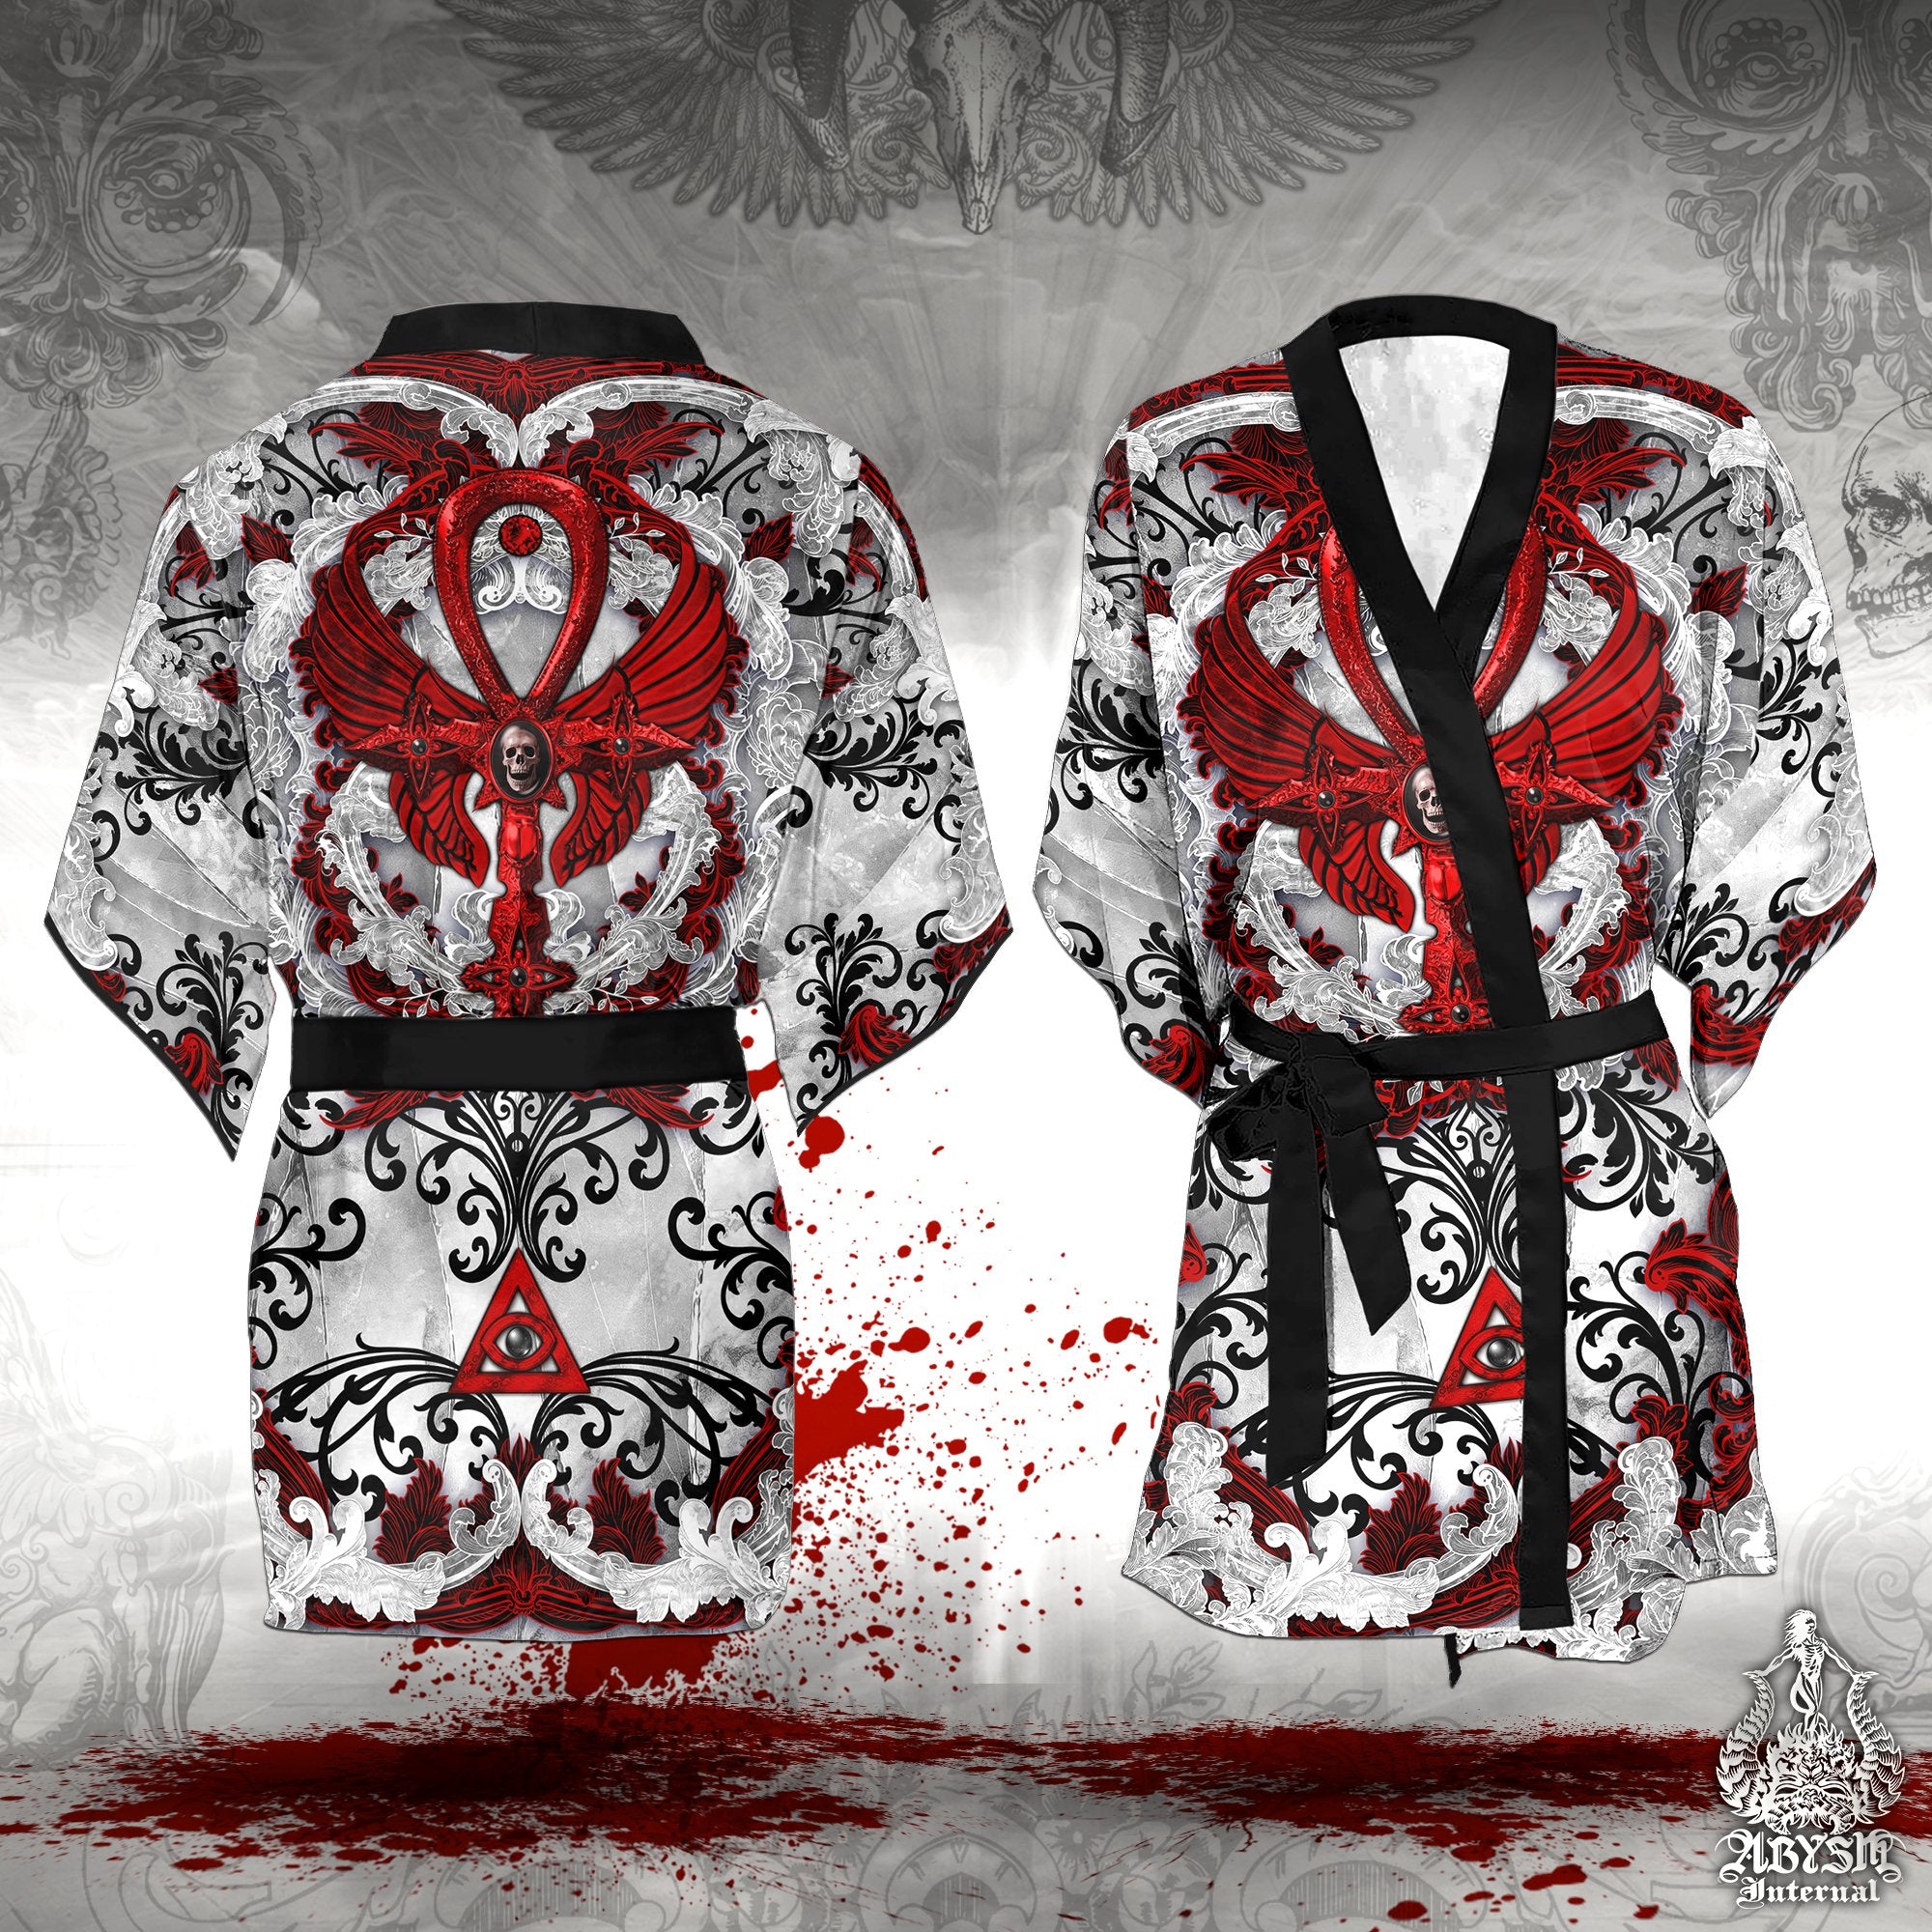 Bloody White Goth Short Kimono Robe, Beach Party Outfit, Ankh Cross Coverup, Gothic Summer Festival, Indie and Alternative Clothing, Unisex - White, Black, and Red, 3 Colors - Abysm Internal